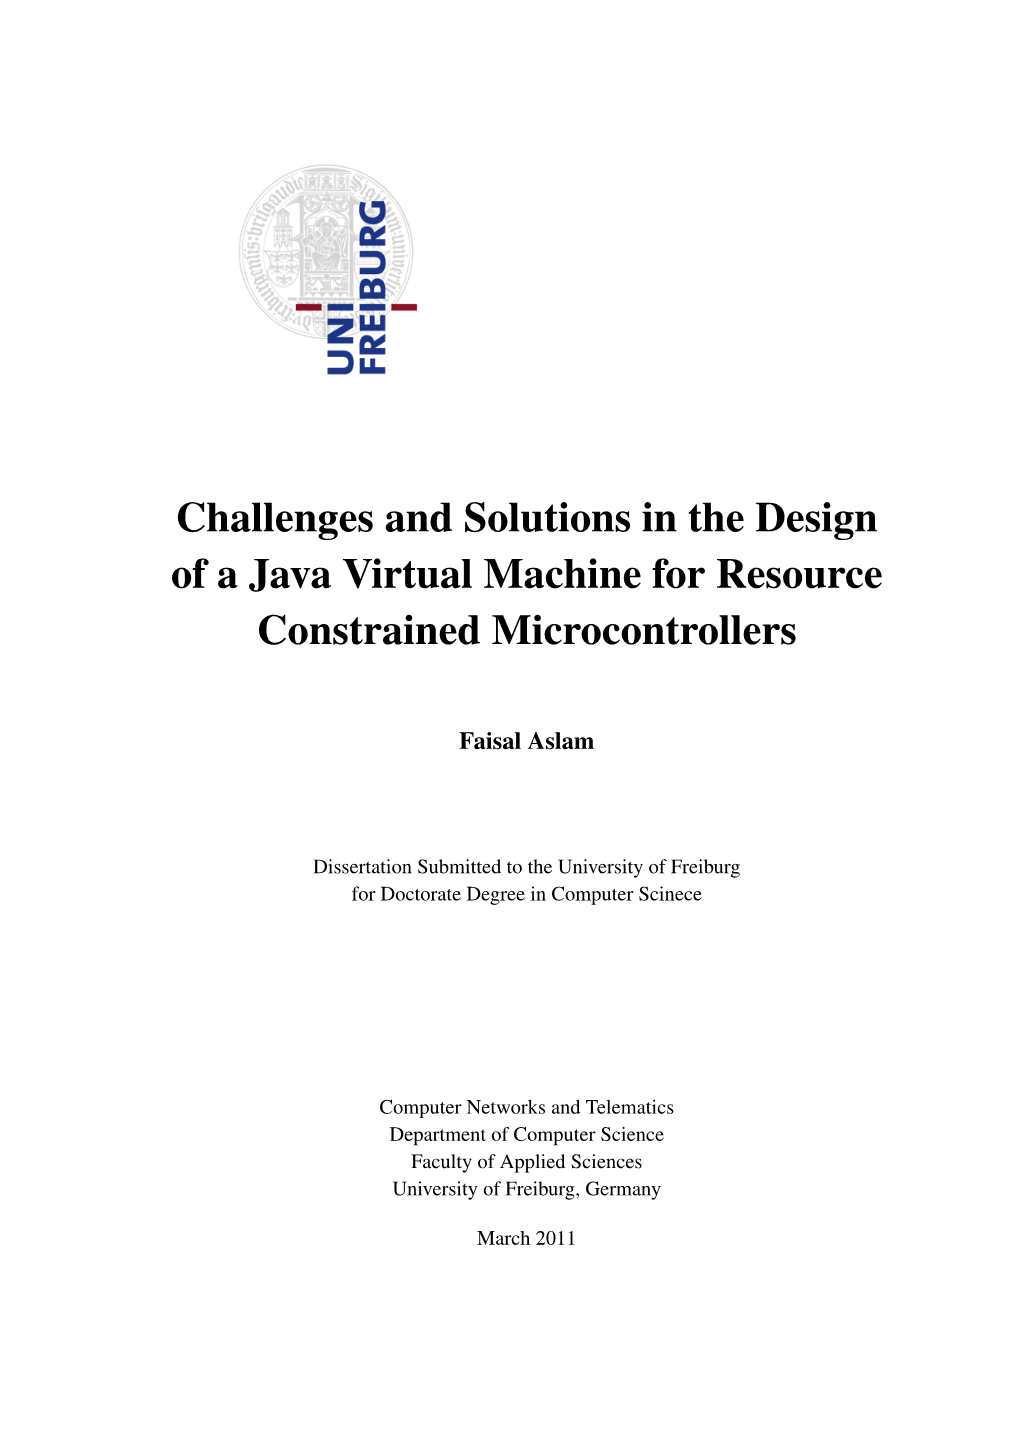 Challenges and Solutions in the Design of a Java Virtual Machine for Resource Constrained Microcontrollers